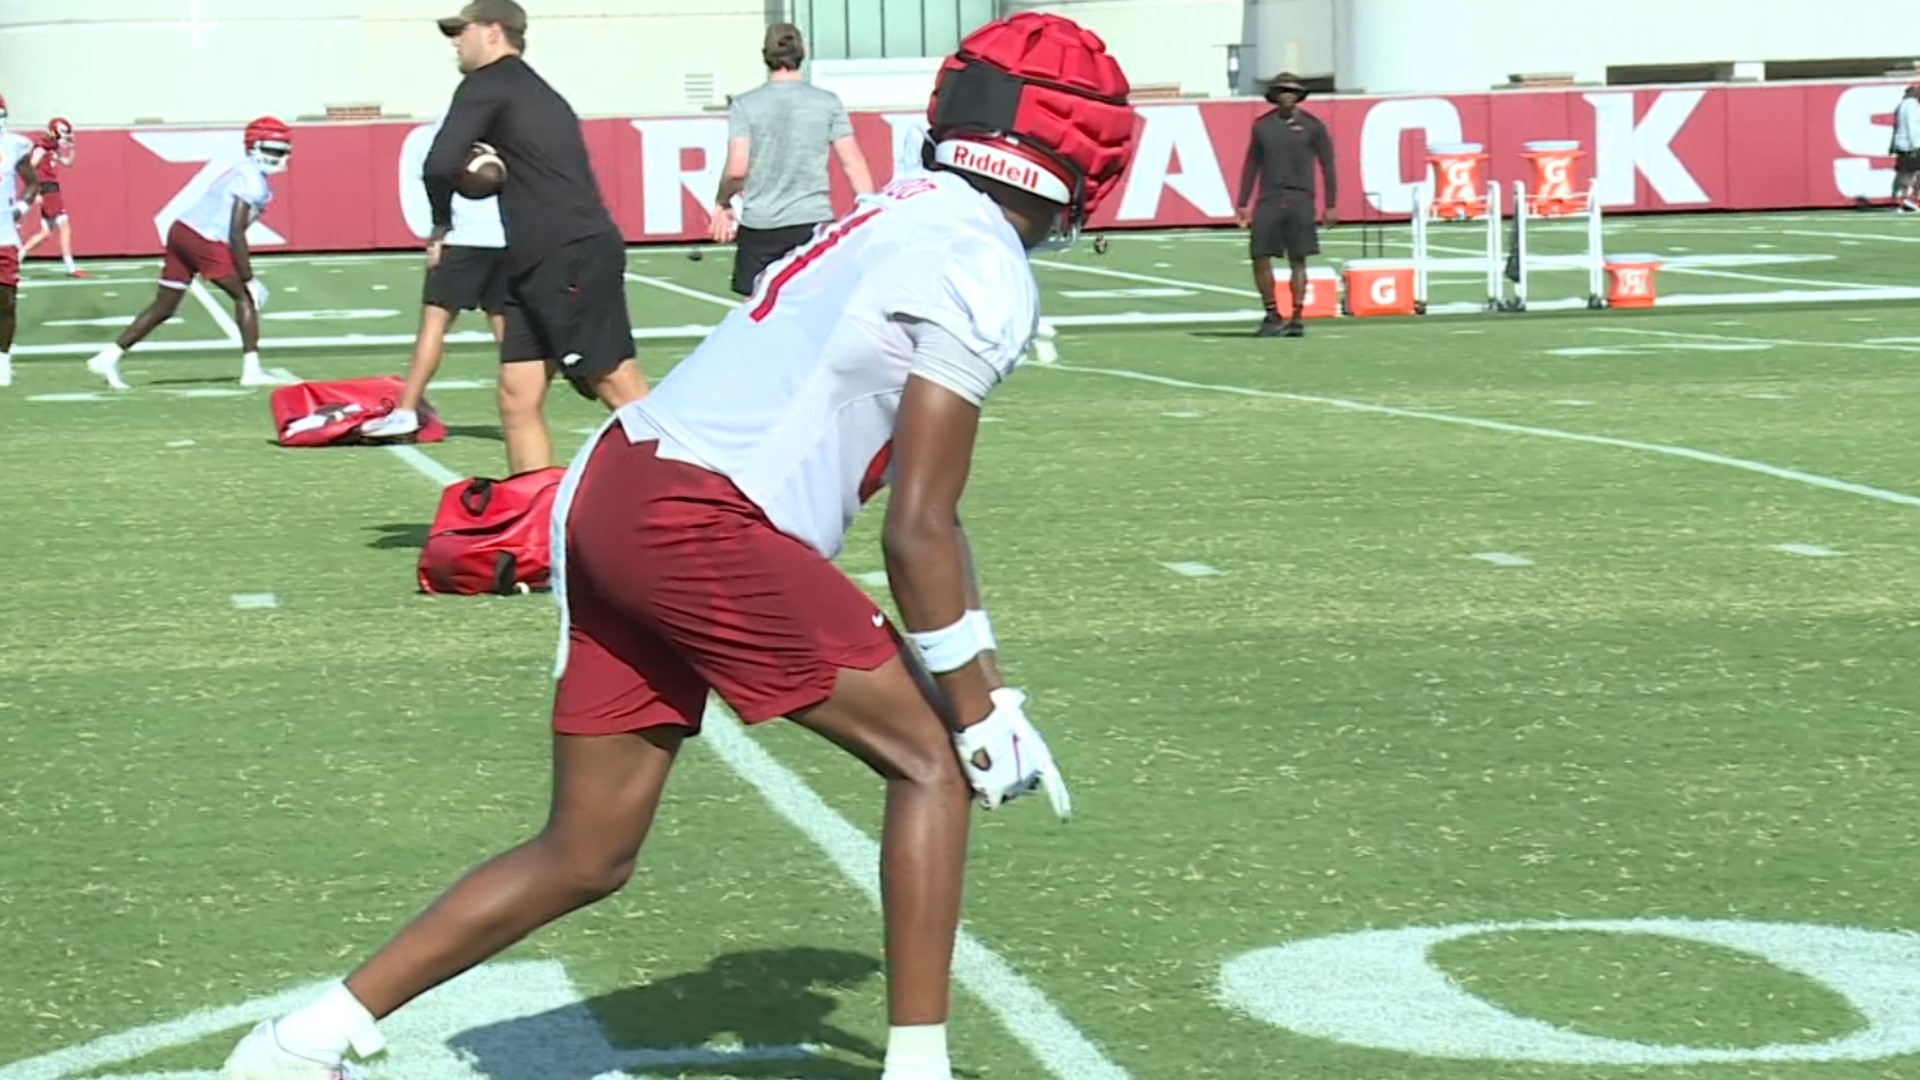 Arkansas held its first scrimmage of fall camp on Saturday, and head coach Sam Pittman has been impressed with the growth his wide receivers have shown.